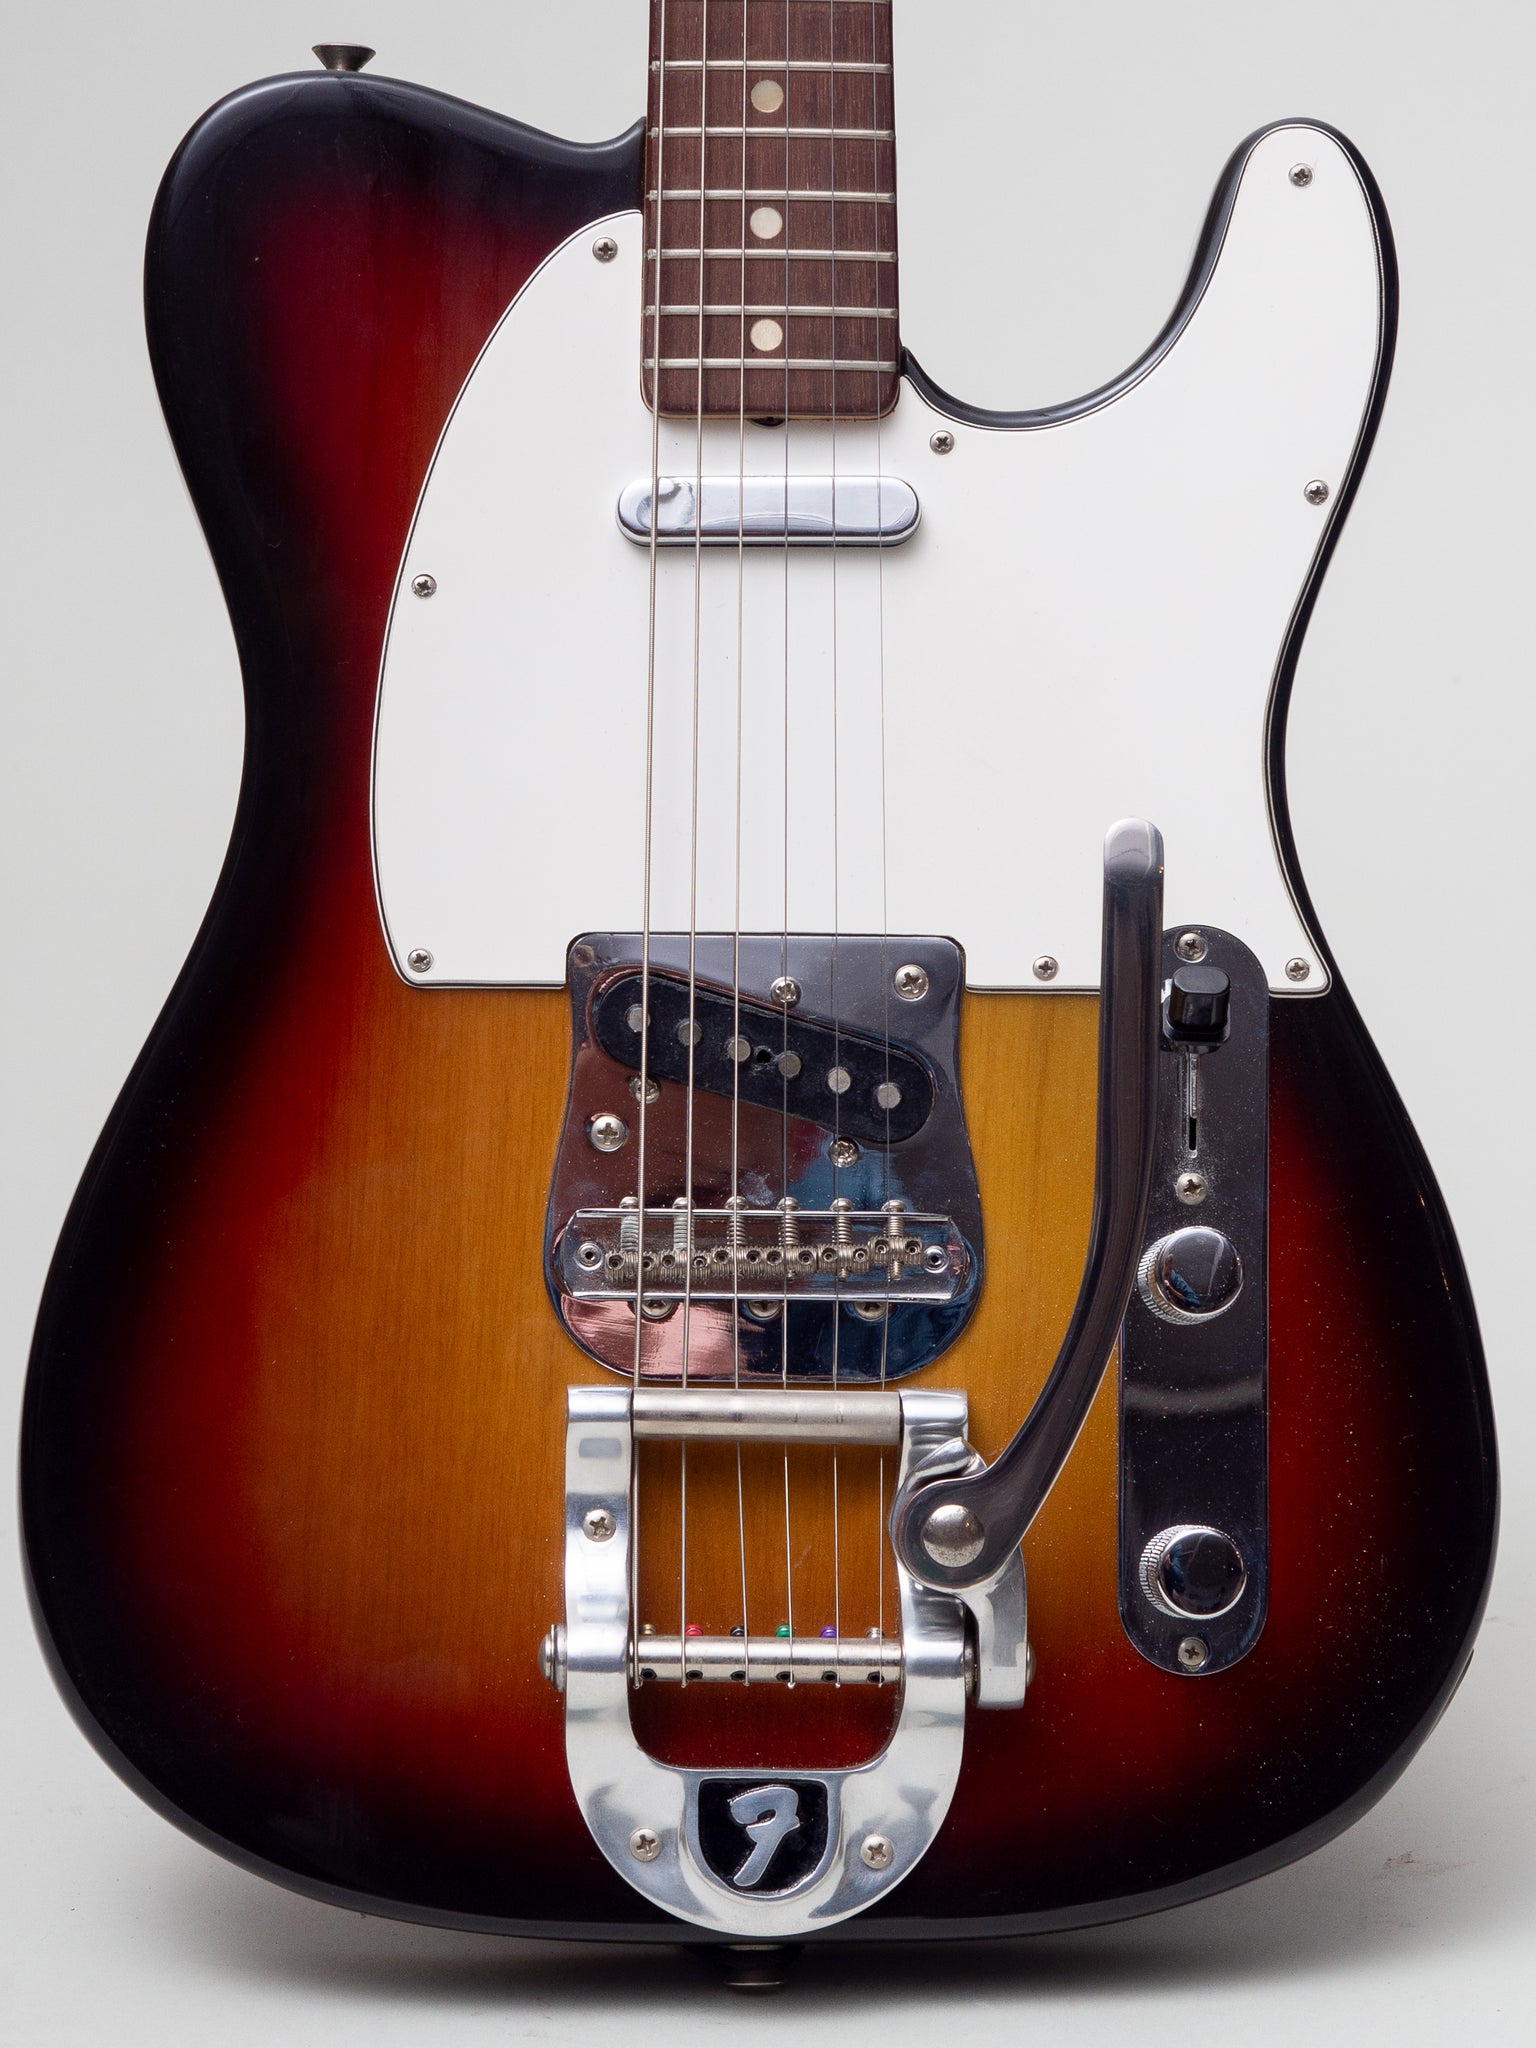 1971 Fender Telecaster with factory Bigsby